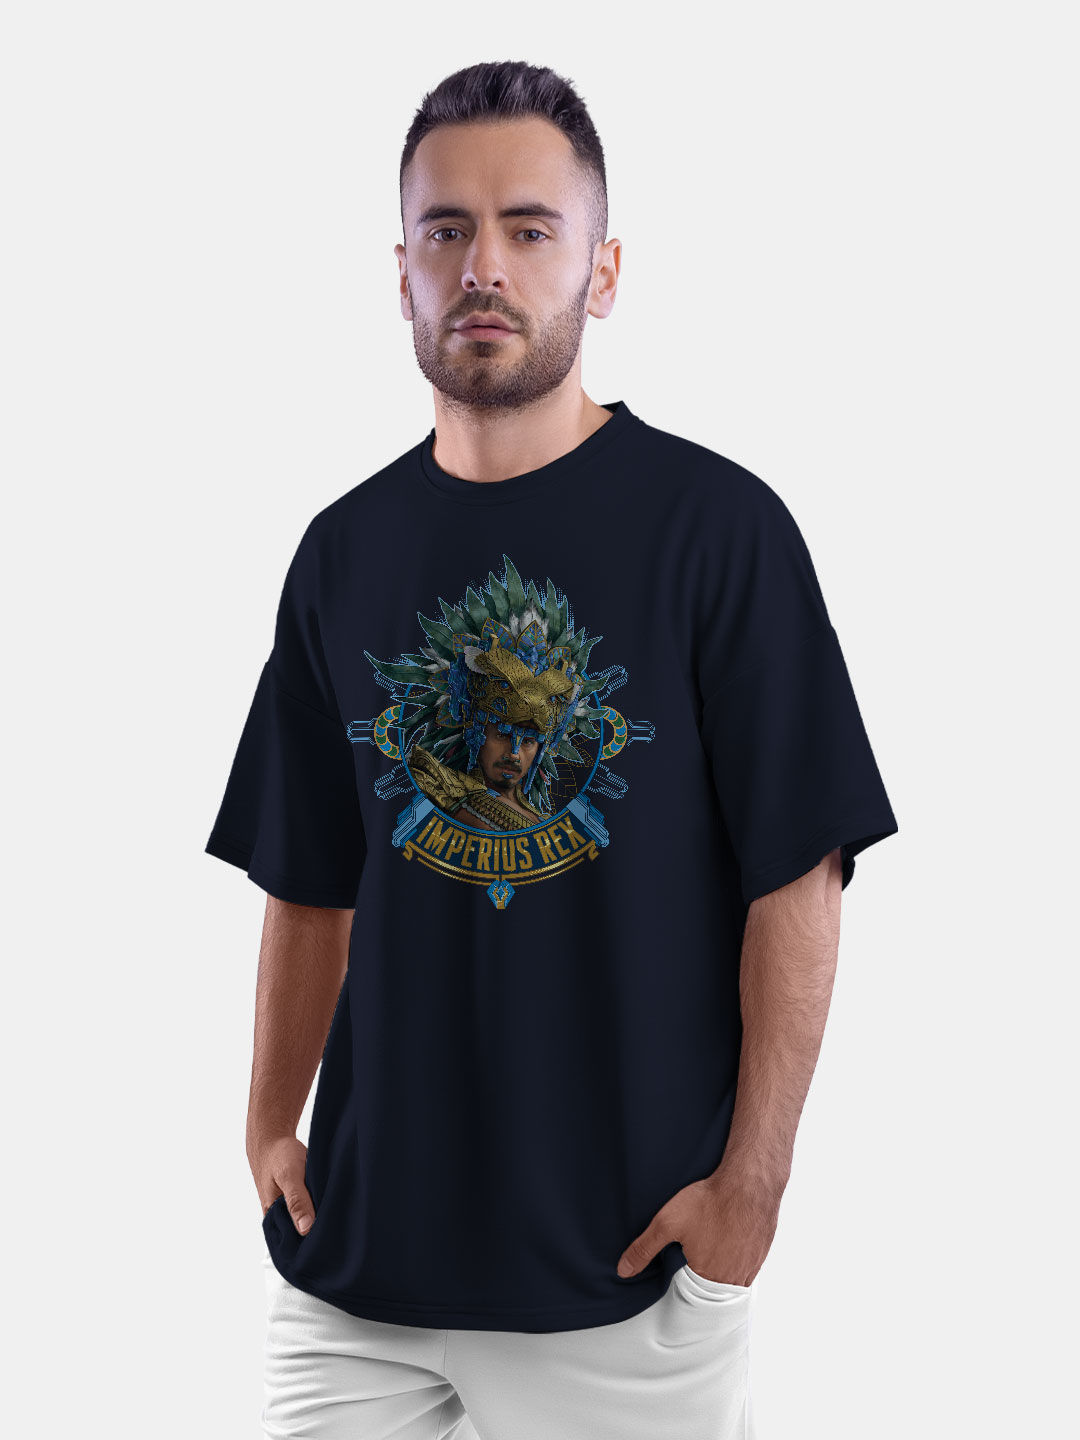 Buy Wakanda Forever Imperius Rex Blue Navy Blue - Male Oversized T-Shirt T-Shirts Online